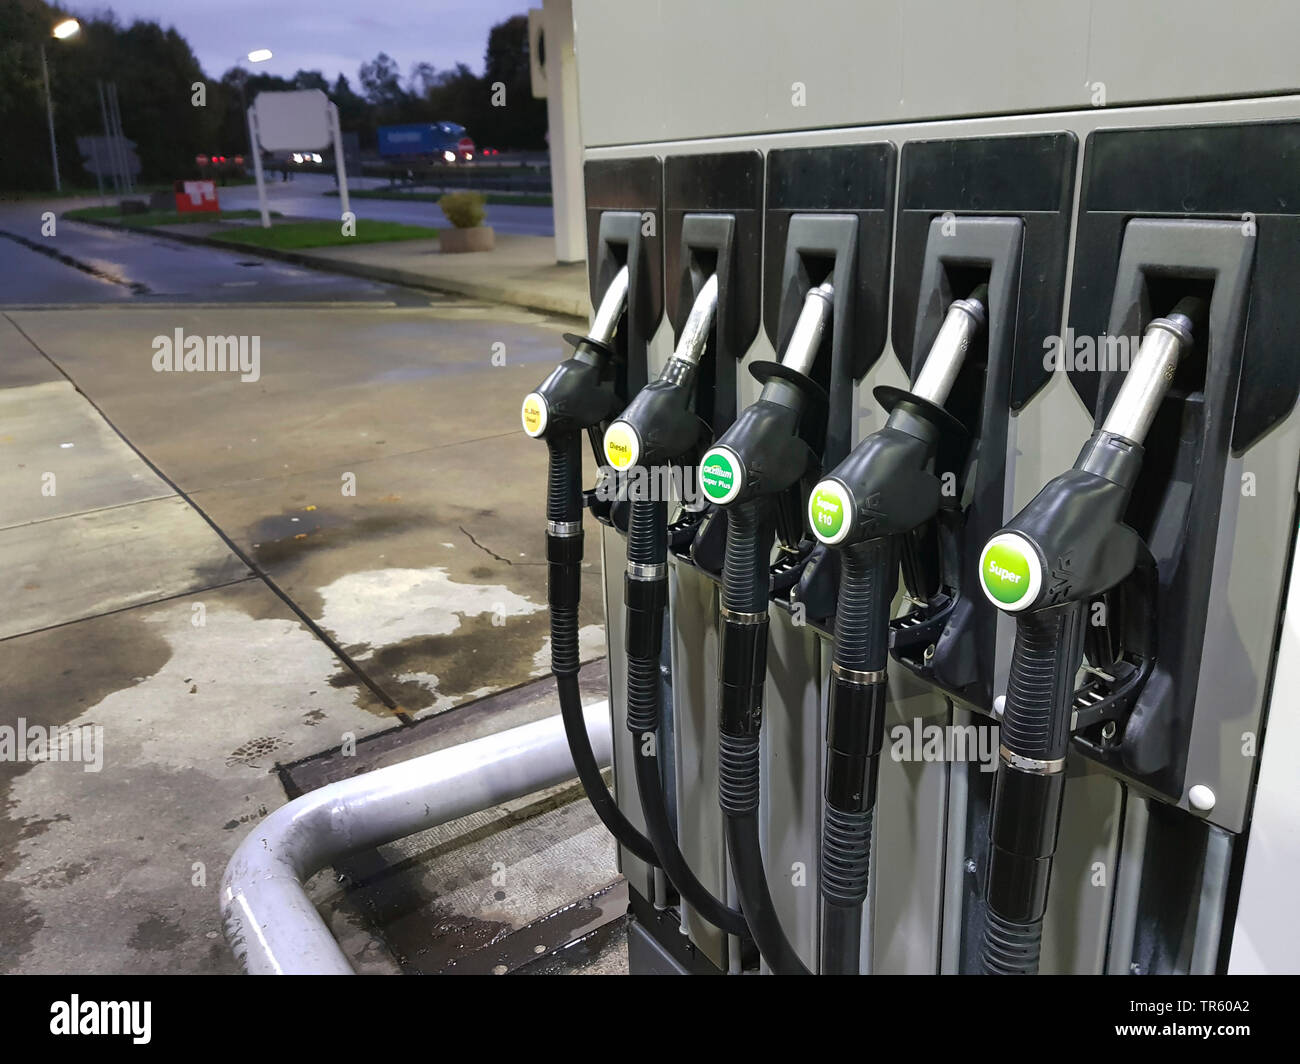 petrol pump for diesel and super, Germany Stock Photo